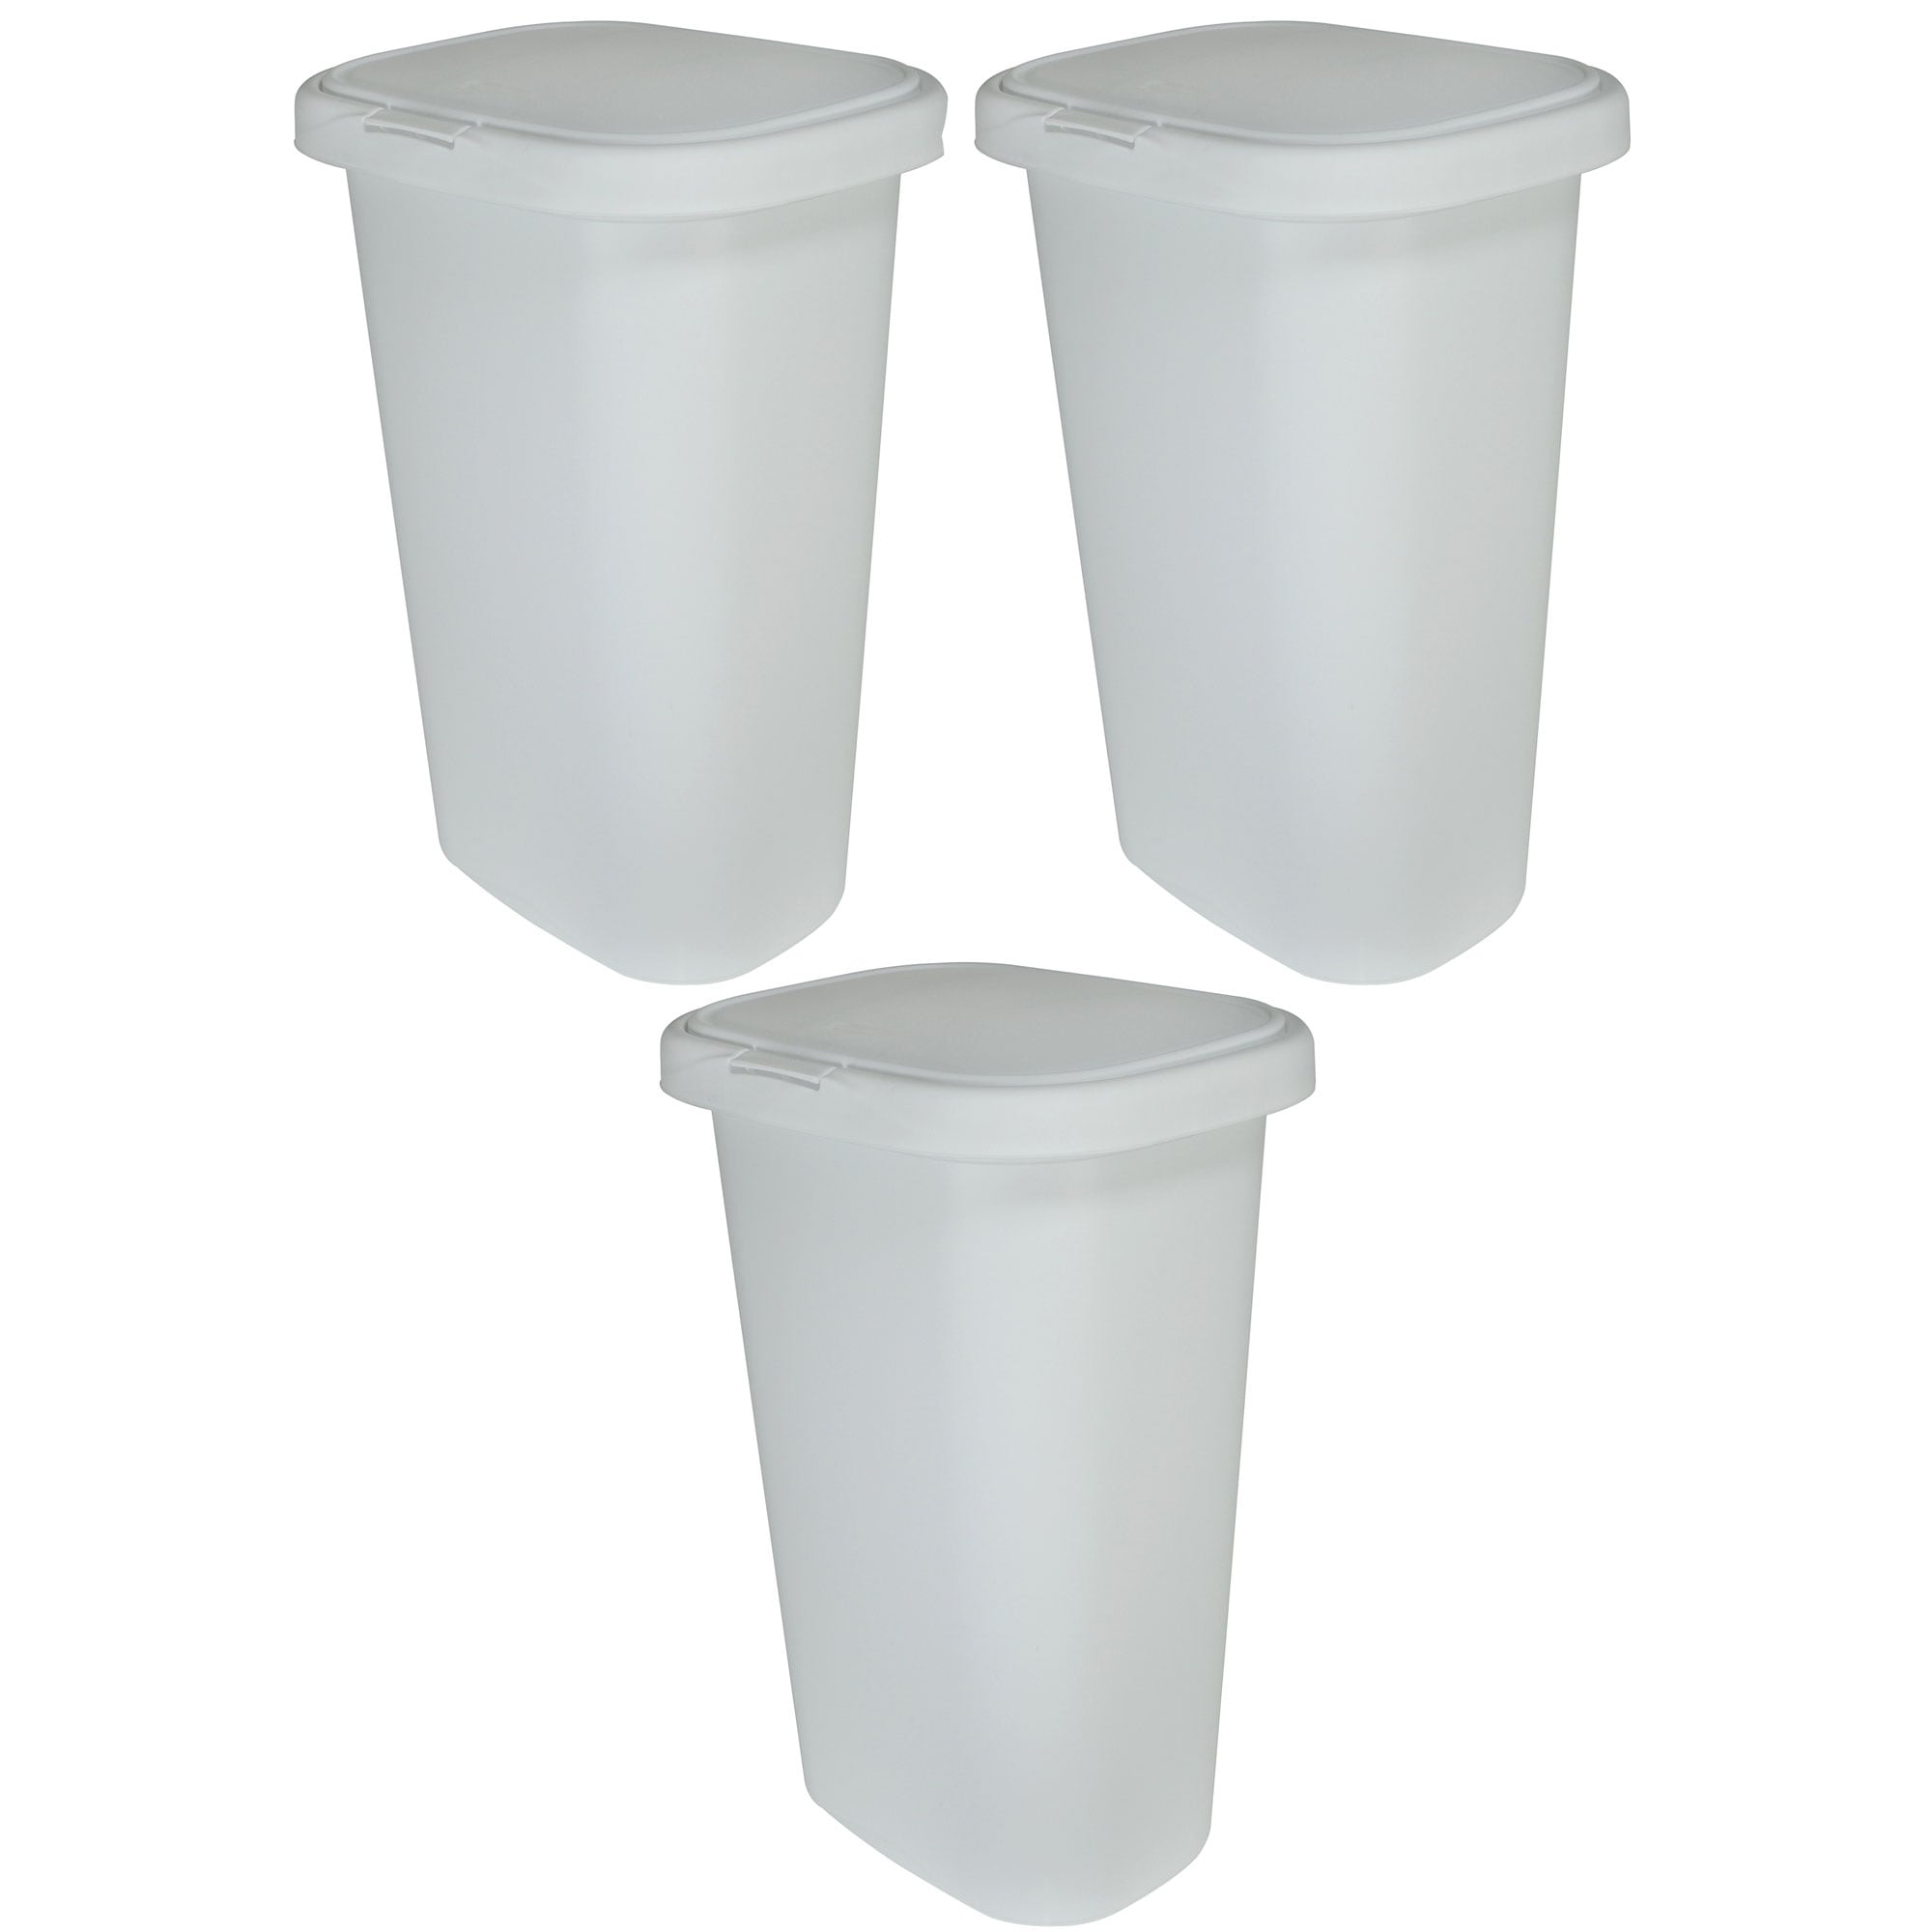 https://ak1.ostkcdn.com/images/products/is/images/direct/0aeb00eb9bf002a40031b65c59780ac42c064902/Rubbermaid-13-Gallon-Rectangular-Spring-Top-Lid-Wastebasket-Trash-Can-%283-Pack%29.jpg